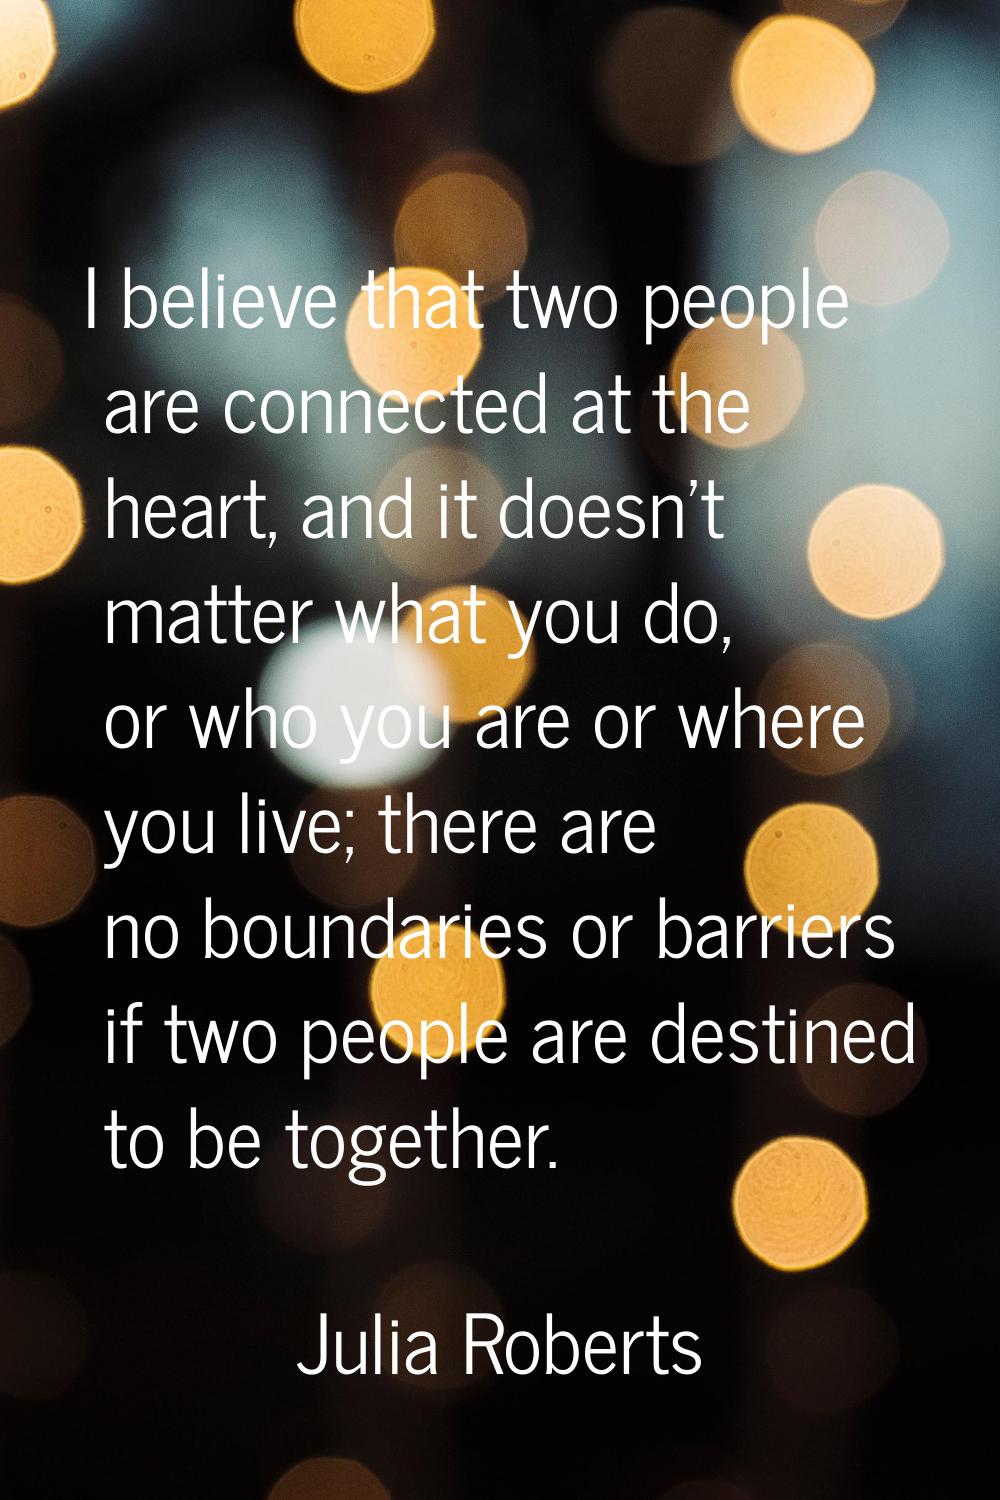 I believe that two people are connected at the heart, and it doesn't matter what you do, or who you